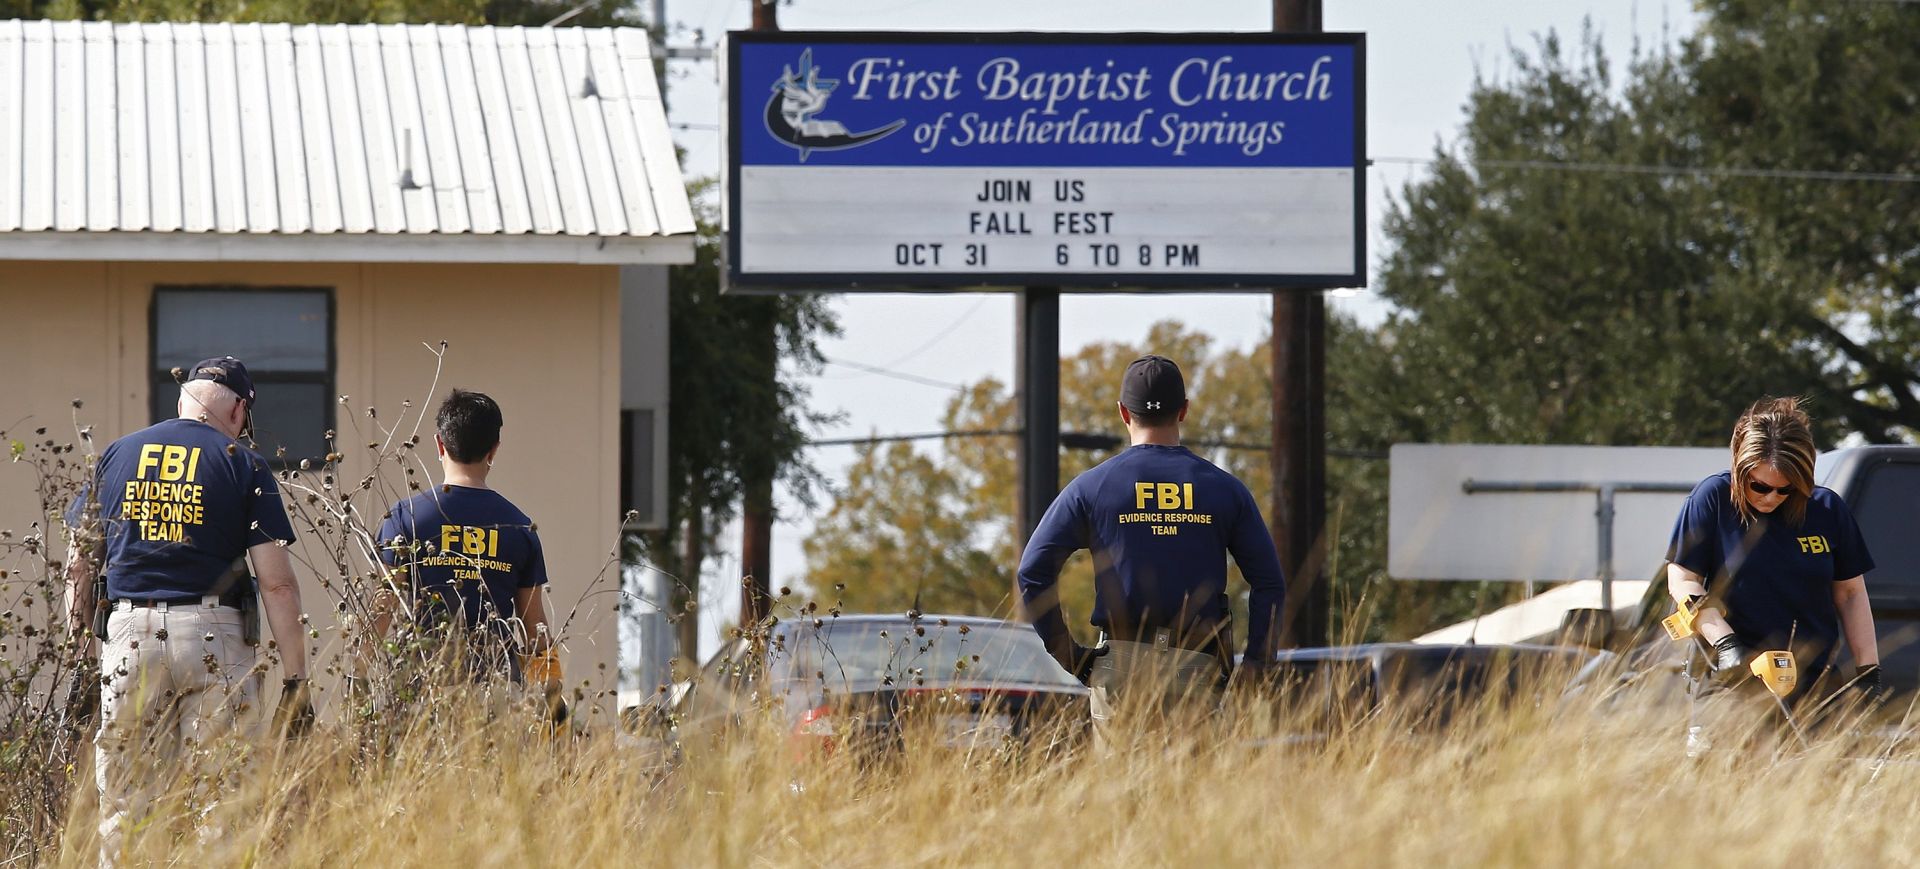 epa06312241 Members of the FBI use metal detectors to search the church grounds while investigators work at the scene of a mass shooting at the First Baptist Church in Sutherland Springs, Texas, USA, 06 November 2017. A single gunman identified as Devin Patrick Kelley, 26, is suspected of killing 26 people including several children as they attended church 05 November 2017. Kelley was found dead in his vehicle after a brief chase, however the cause of his death is unclear.  EPA/LARRY W. SMITH